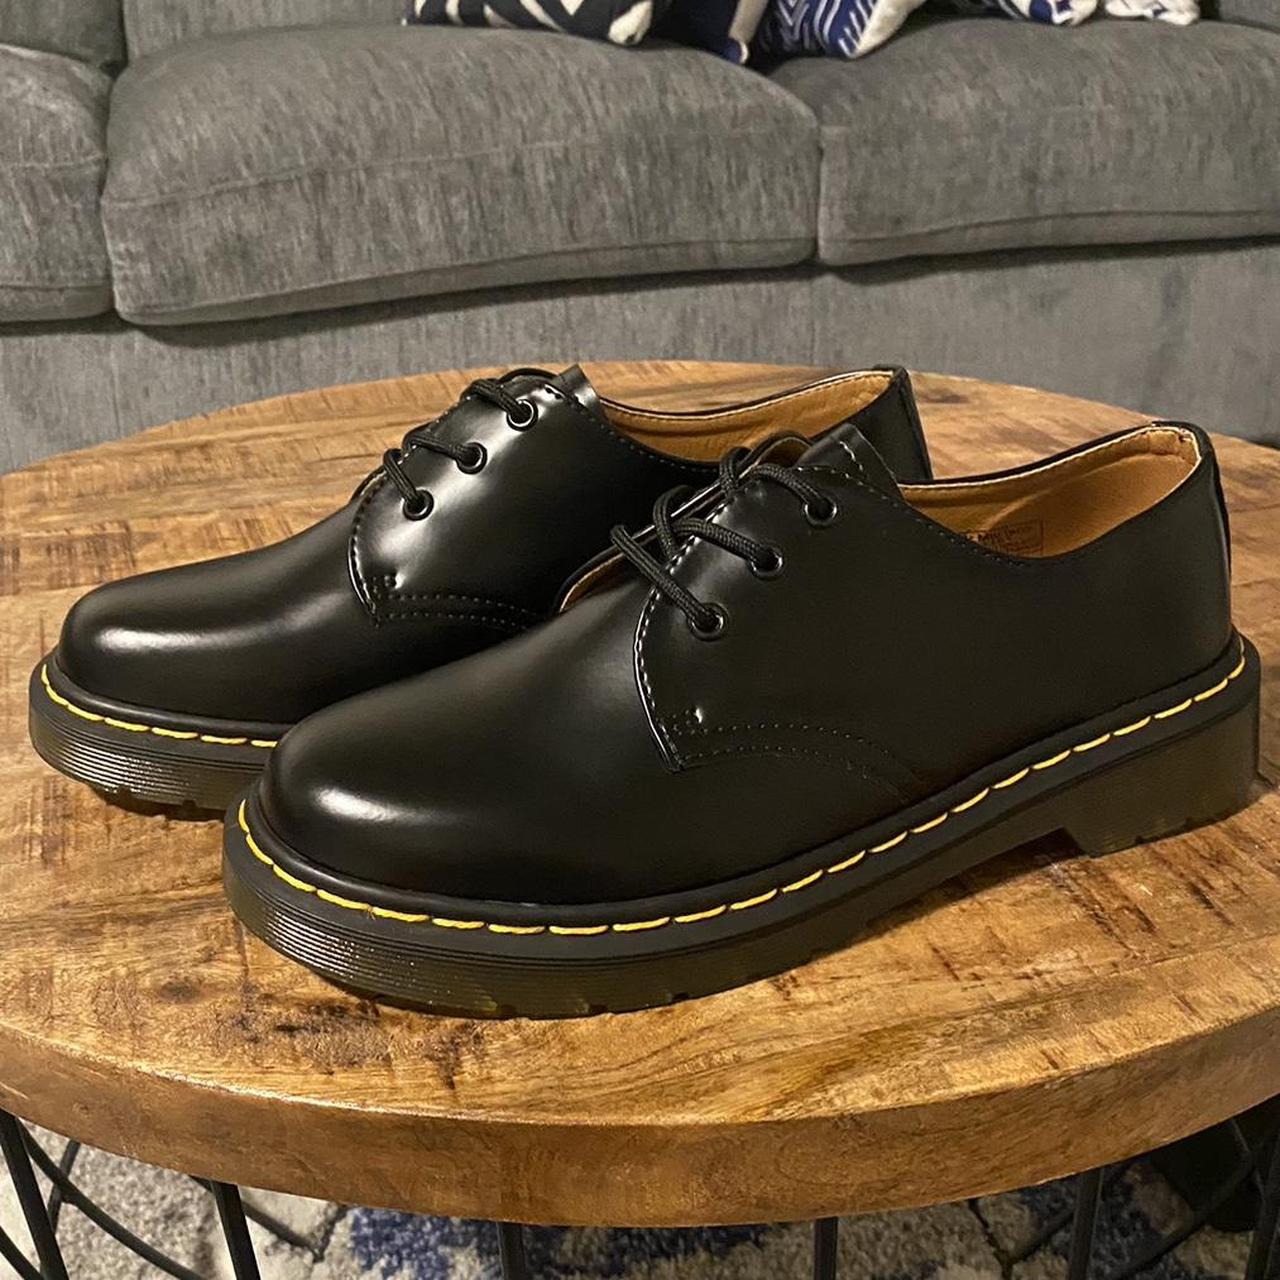 Doc Marten 1461 Low - BRAND NEW NEVER USED, COMES... - Depop